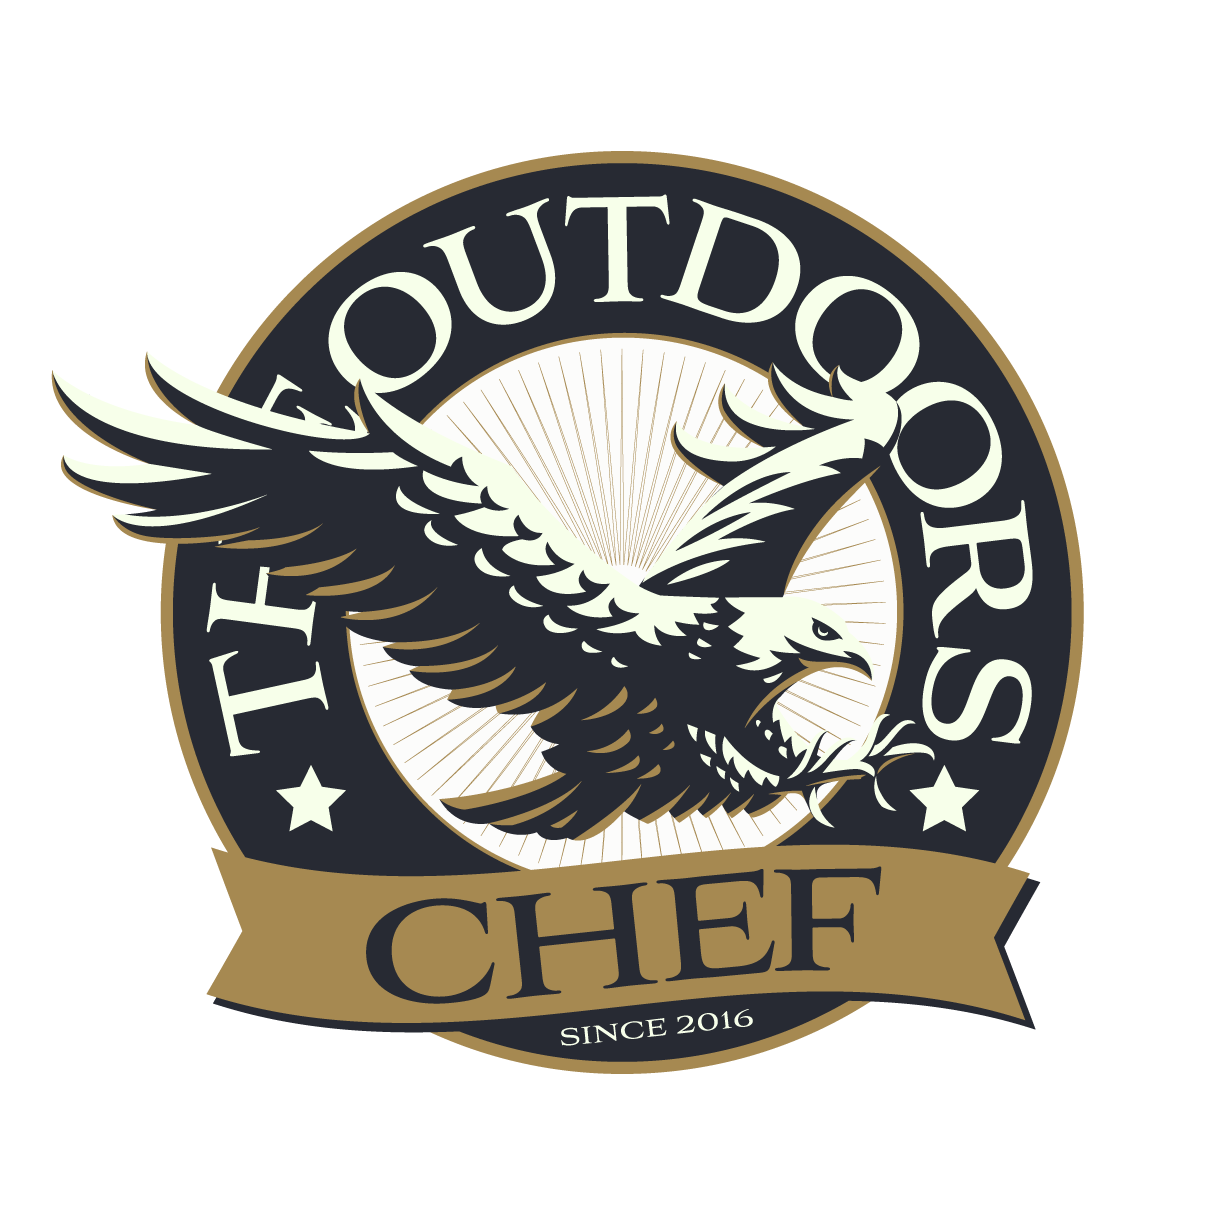 THE OUTDOORS CHEF